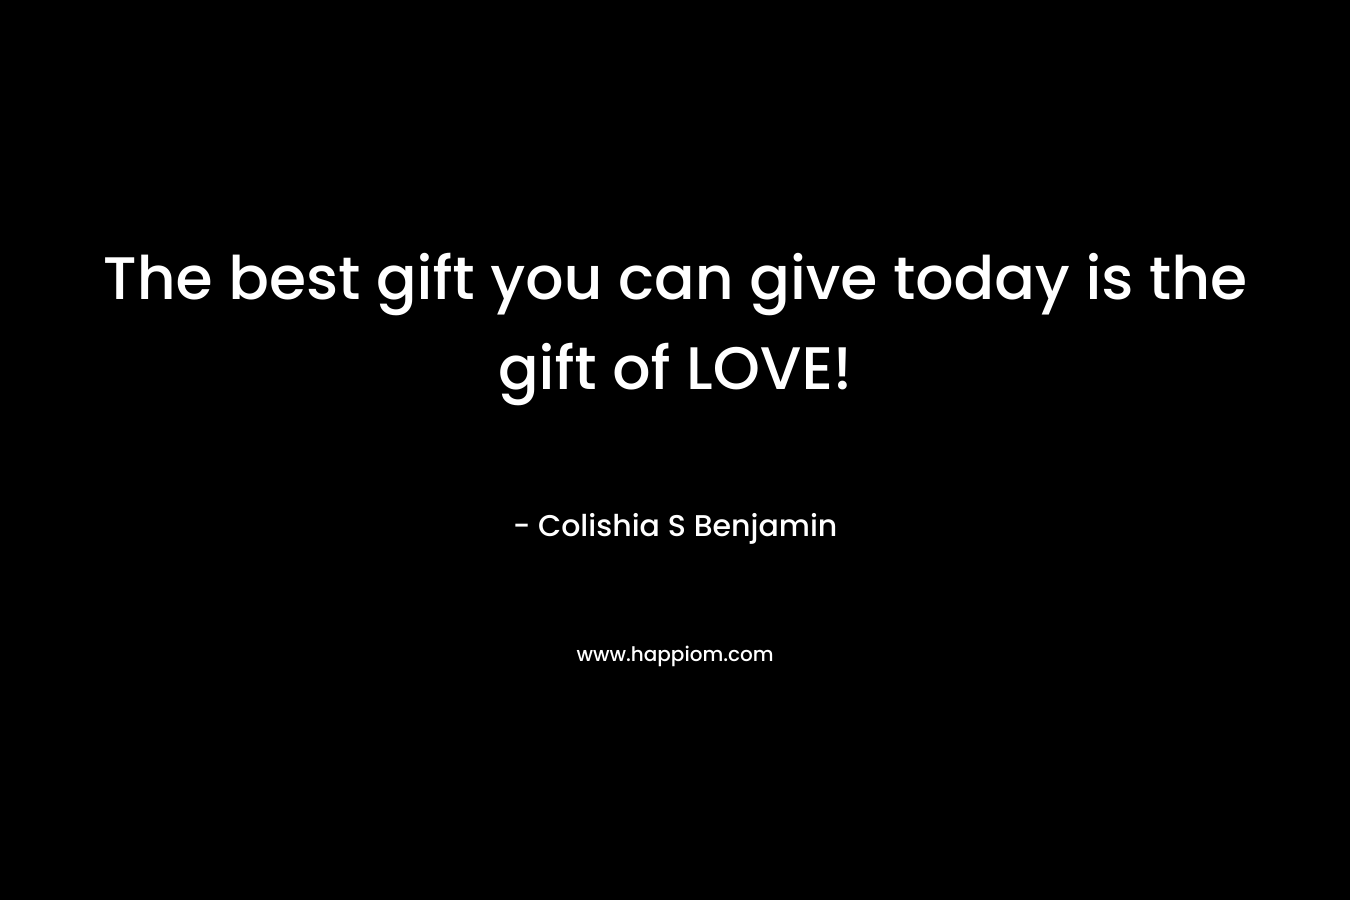 The best gift you can give today is the gift of LOVE!